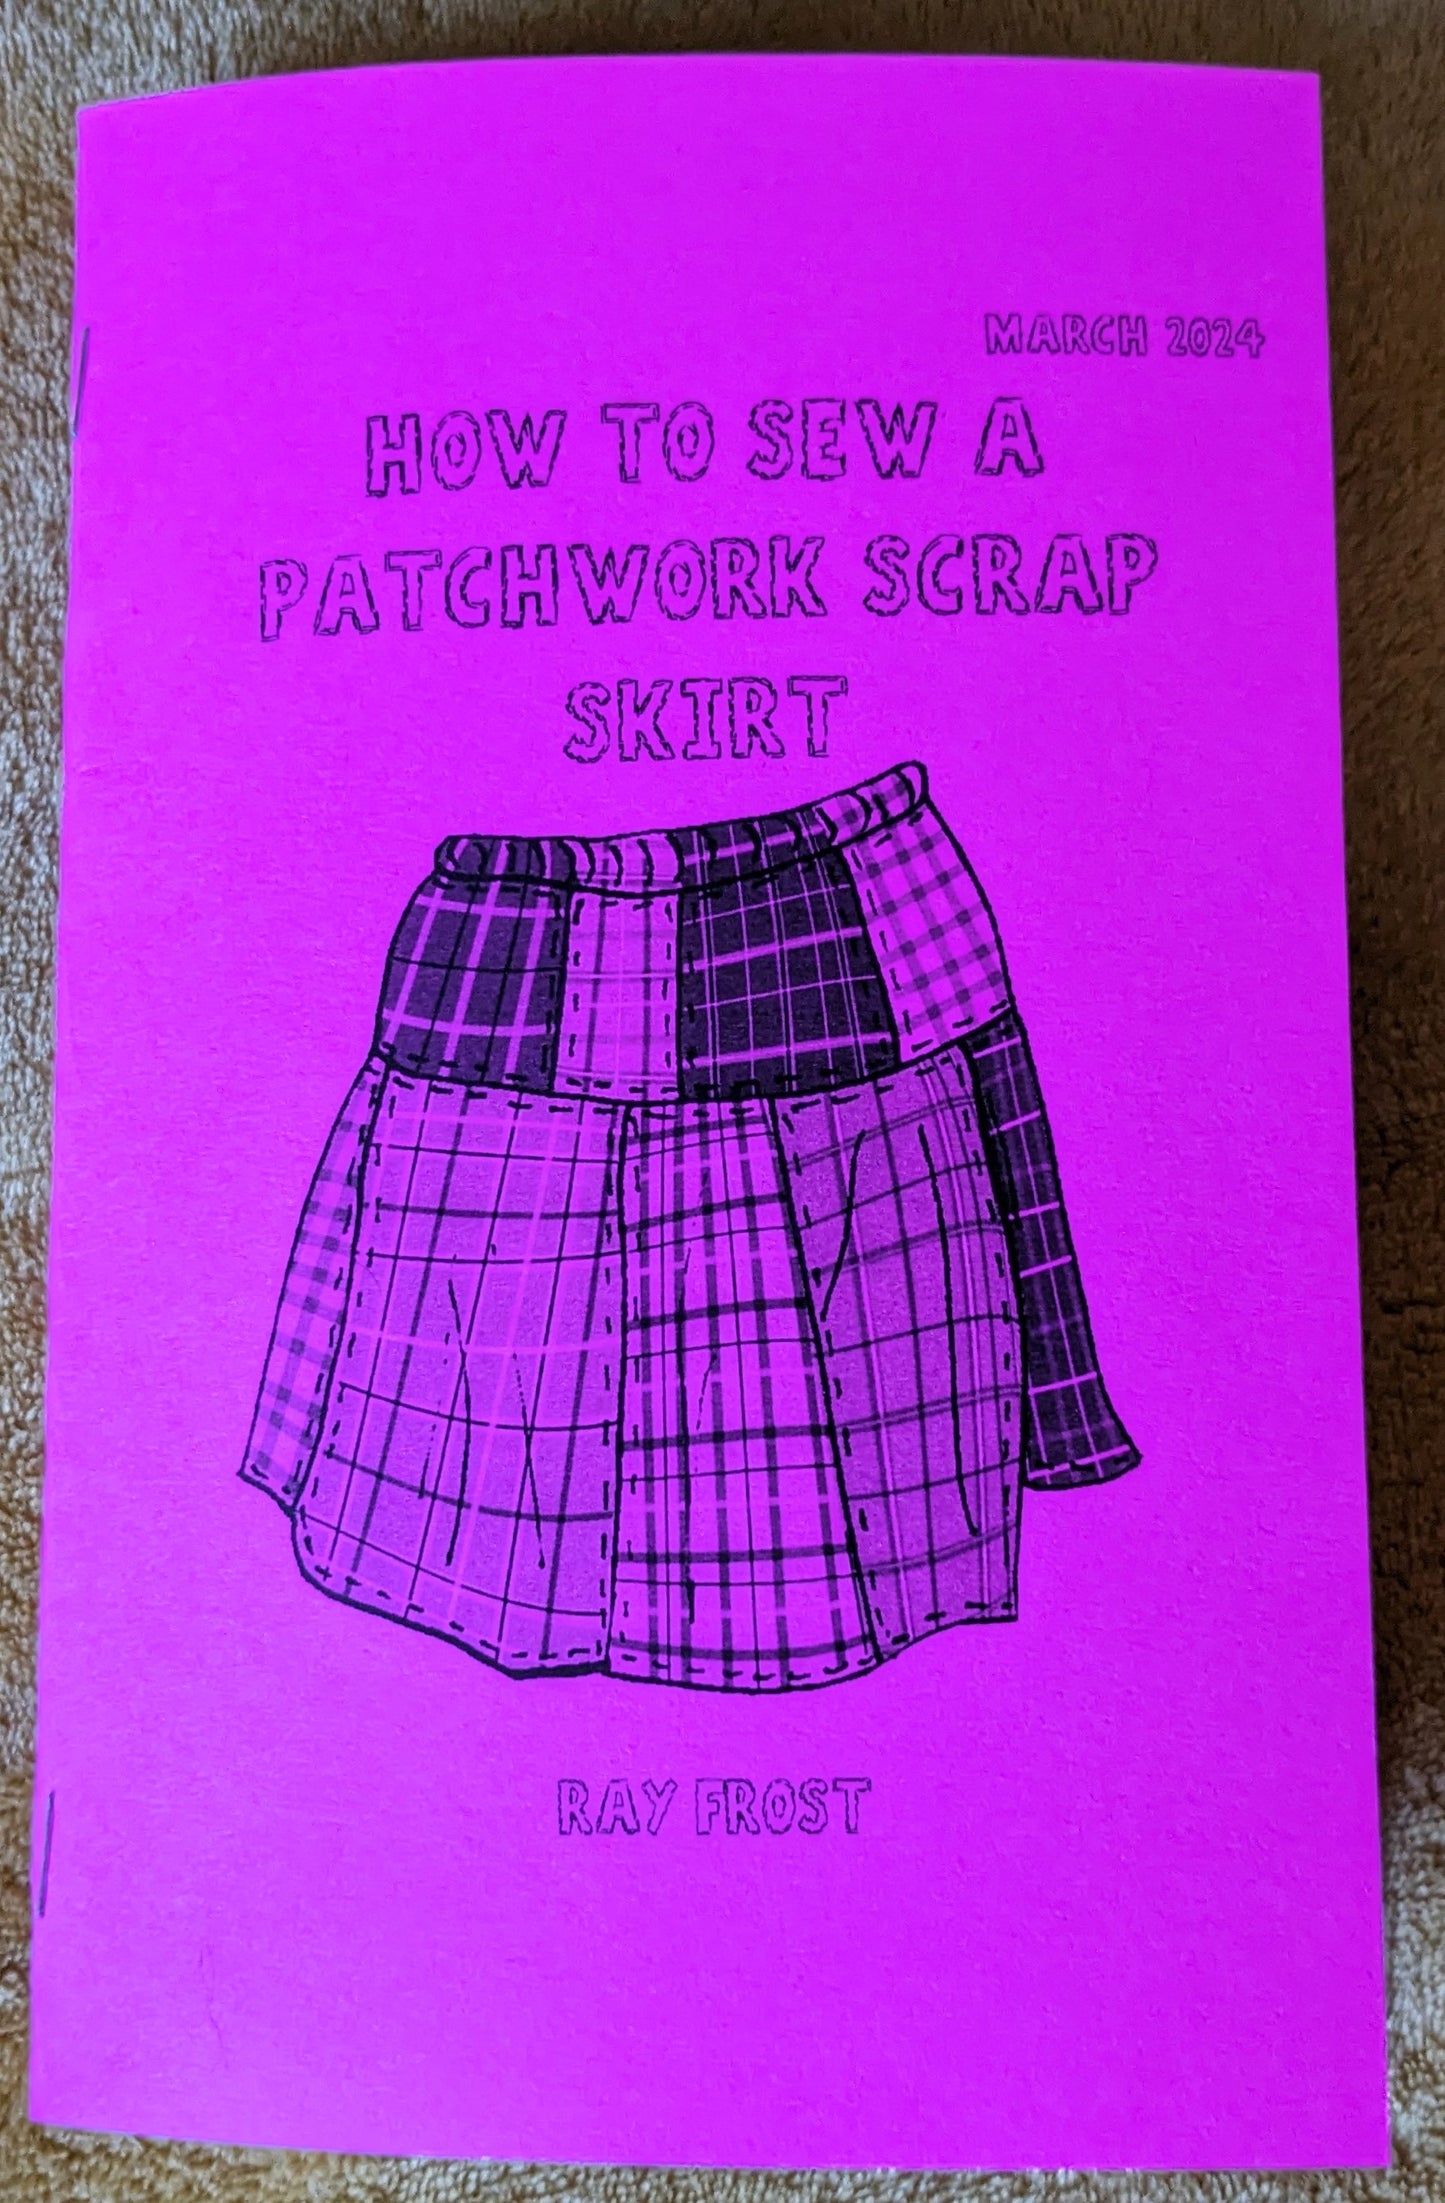 How to Sew a Patchwork Scrap Skirt Zine